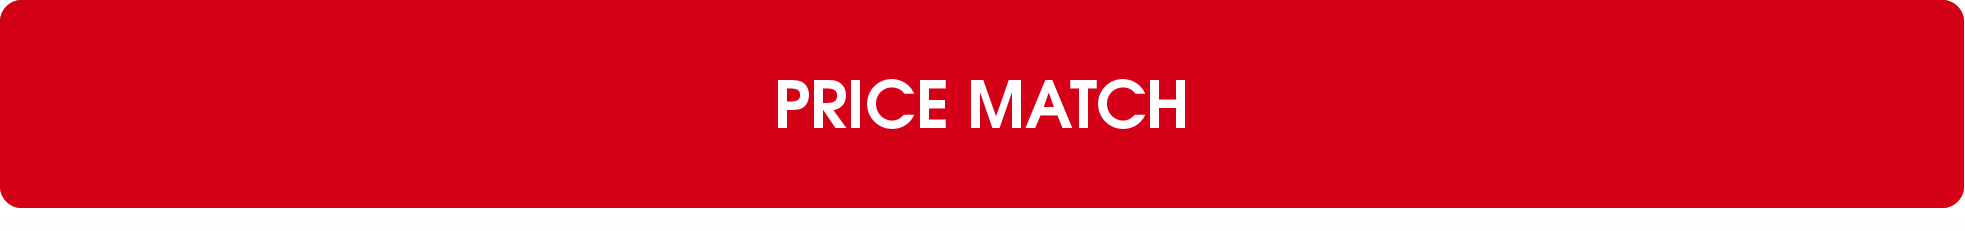 Price Match - North Face Bags